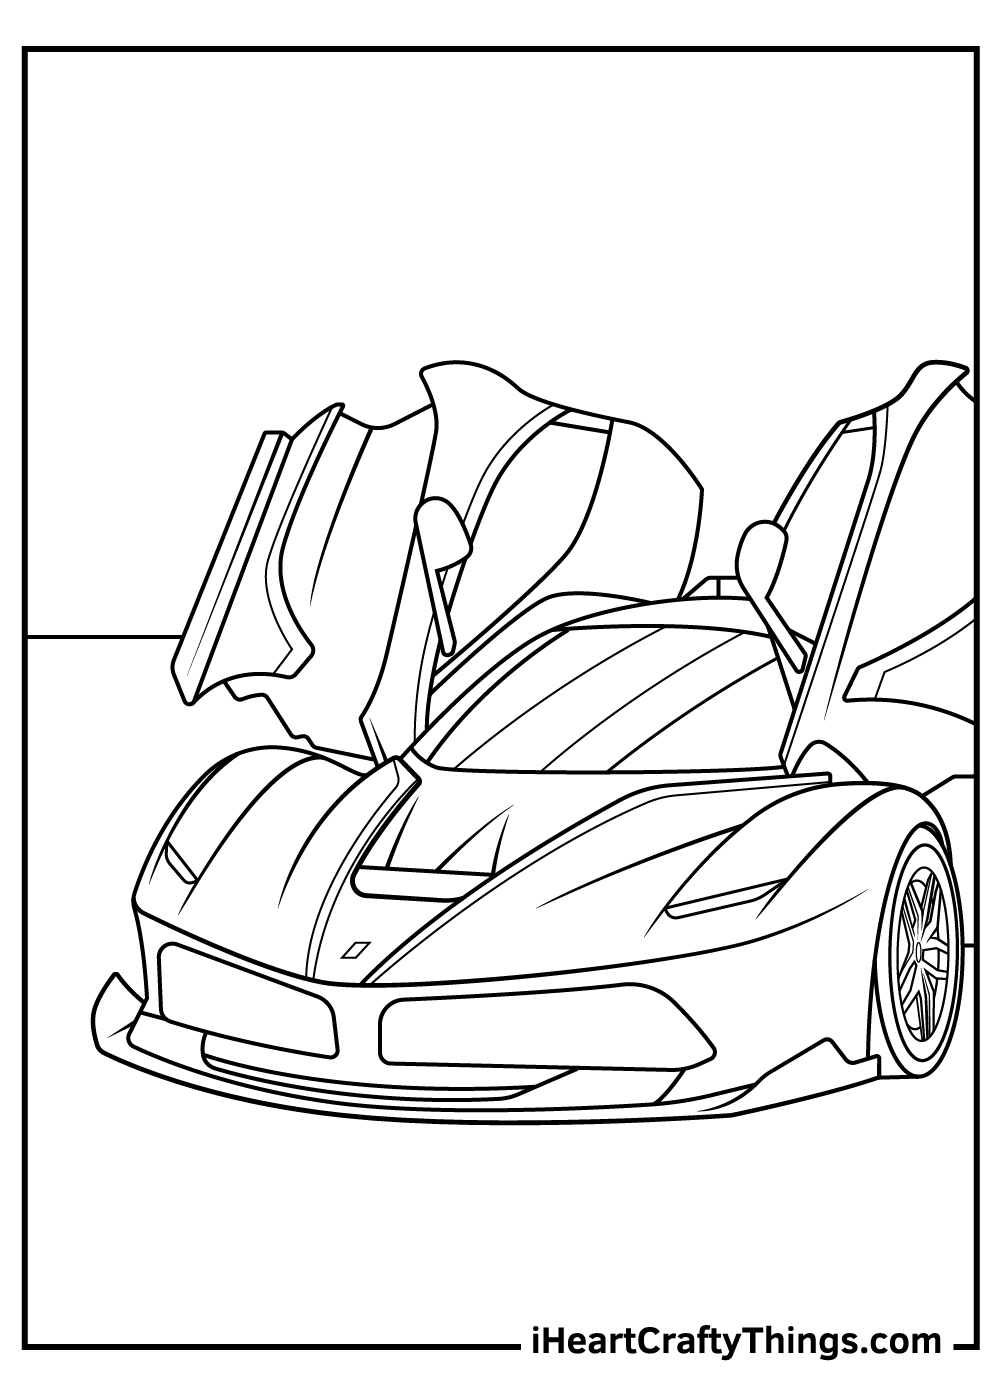 Sports car coloring pages updated